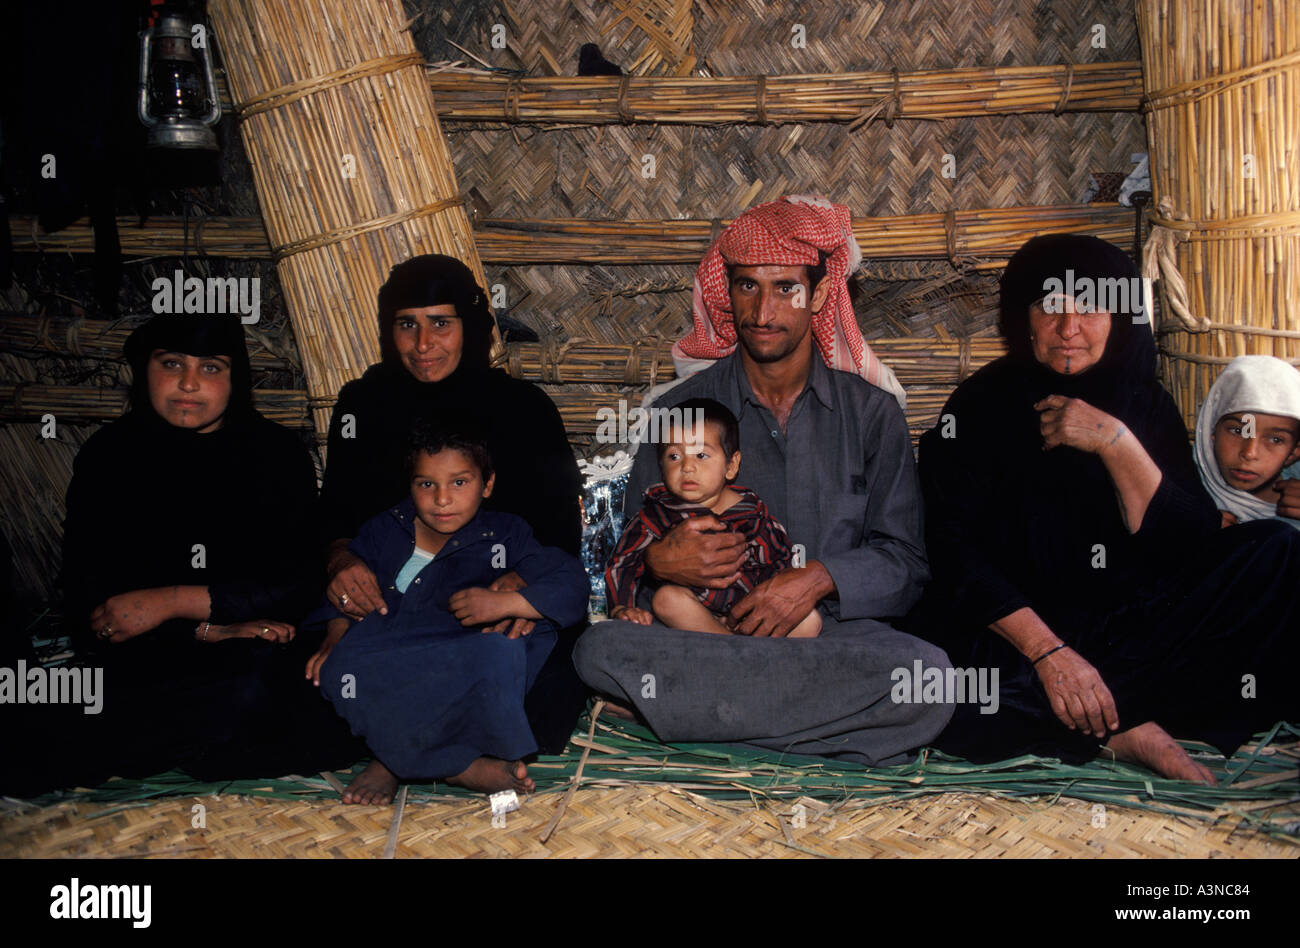 Polygamous family group husband two wives children and four children Marsh Arabs Iraqi 1984. Near Basra Southern Iraq. 1980s HOMER SYKES Stock Photo